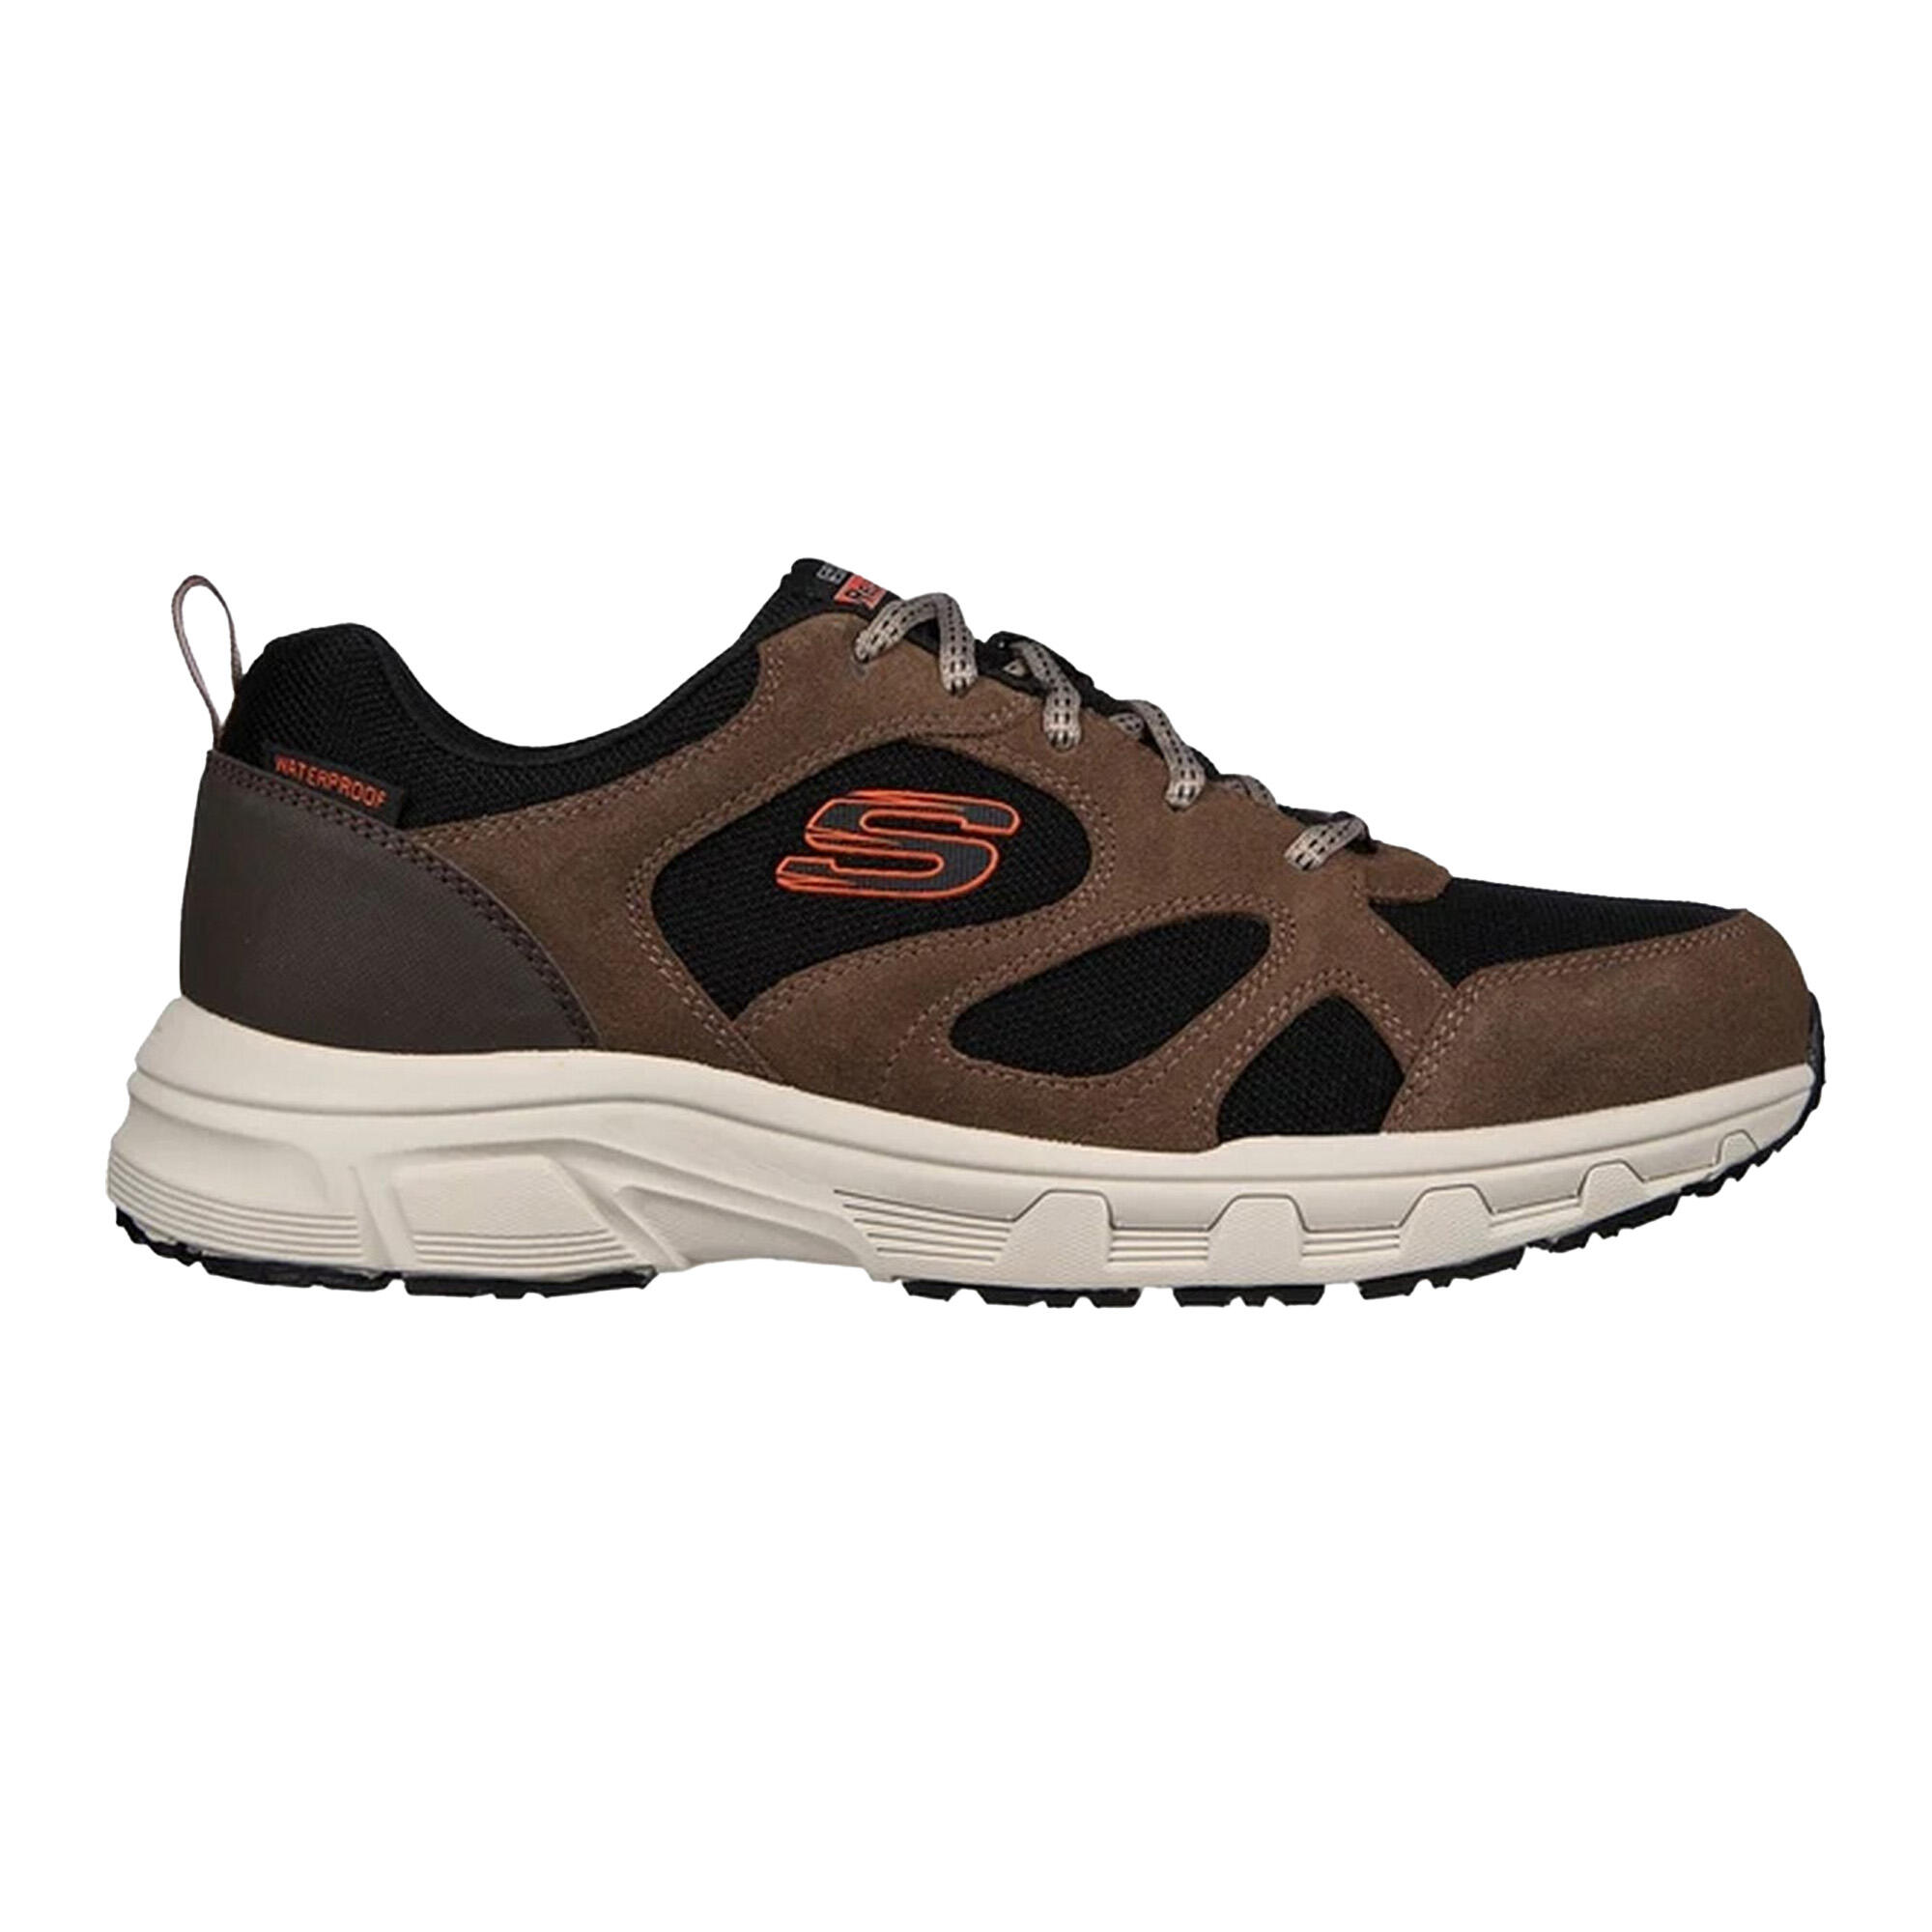 Mens Oak Canyon Sunfair Suede Relaxed Fit Trainers (Brown/Black) 3/5